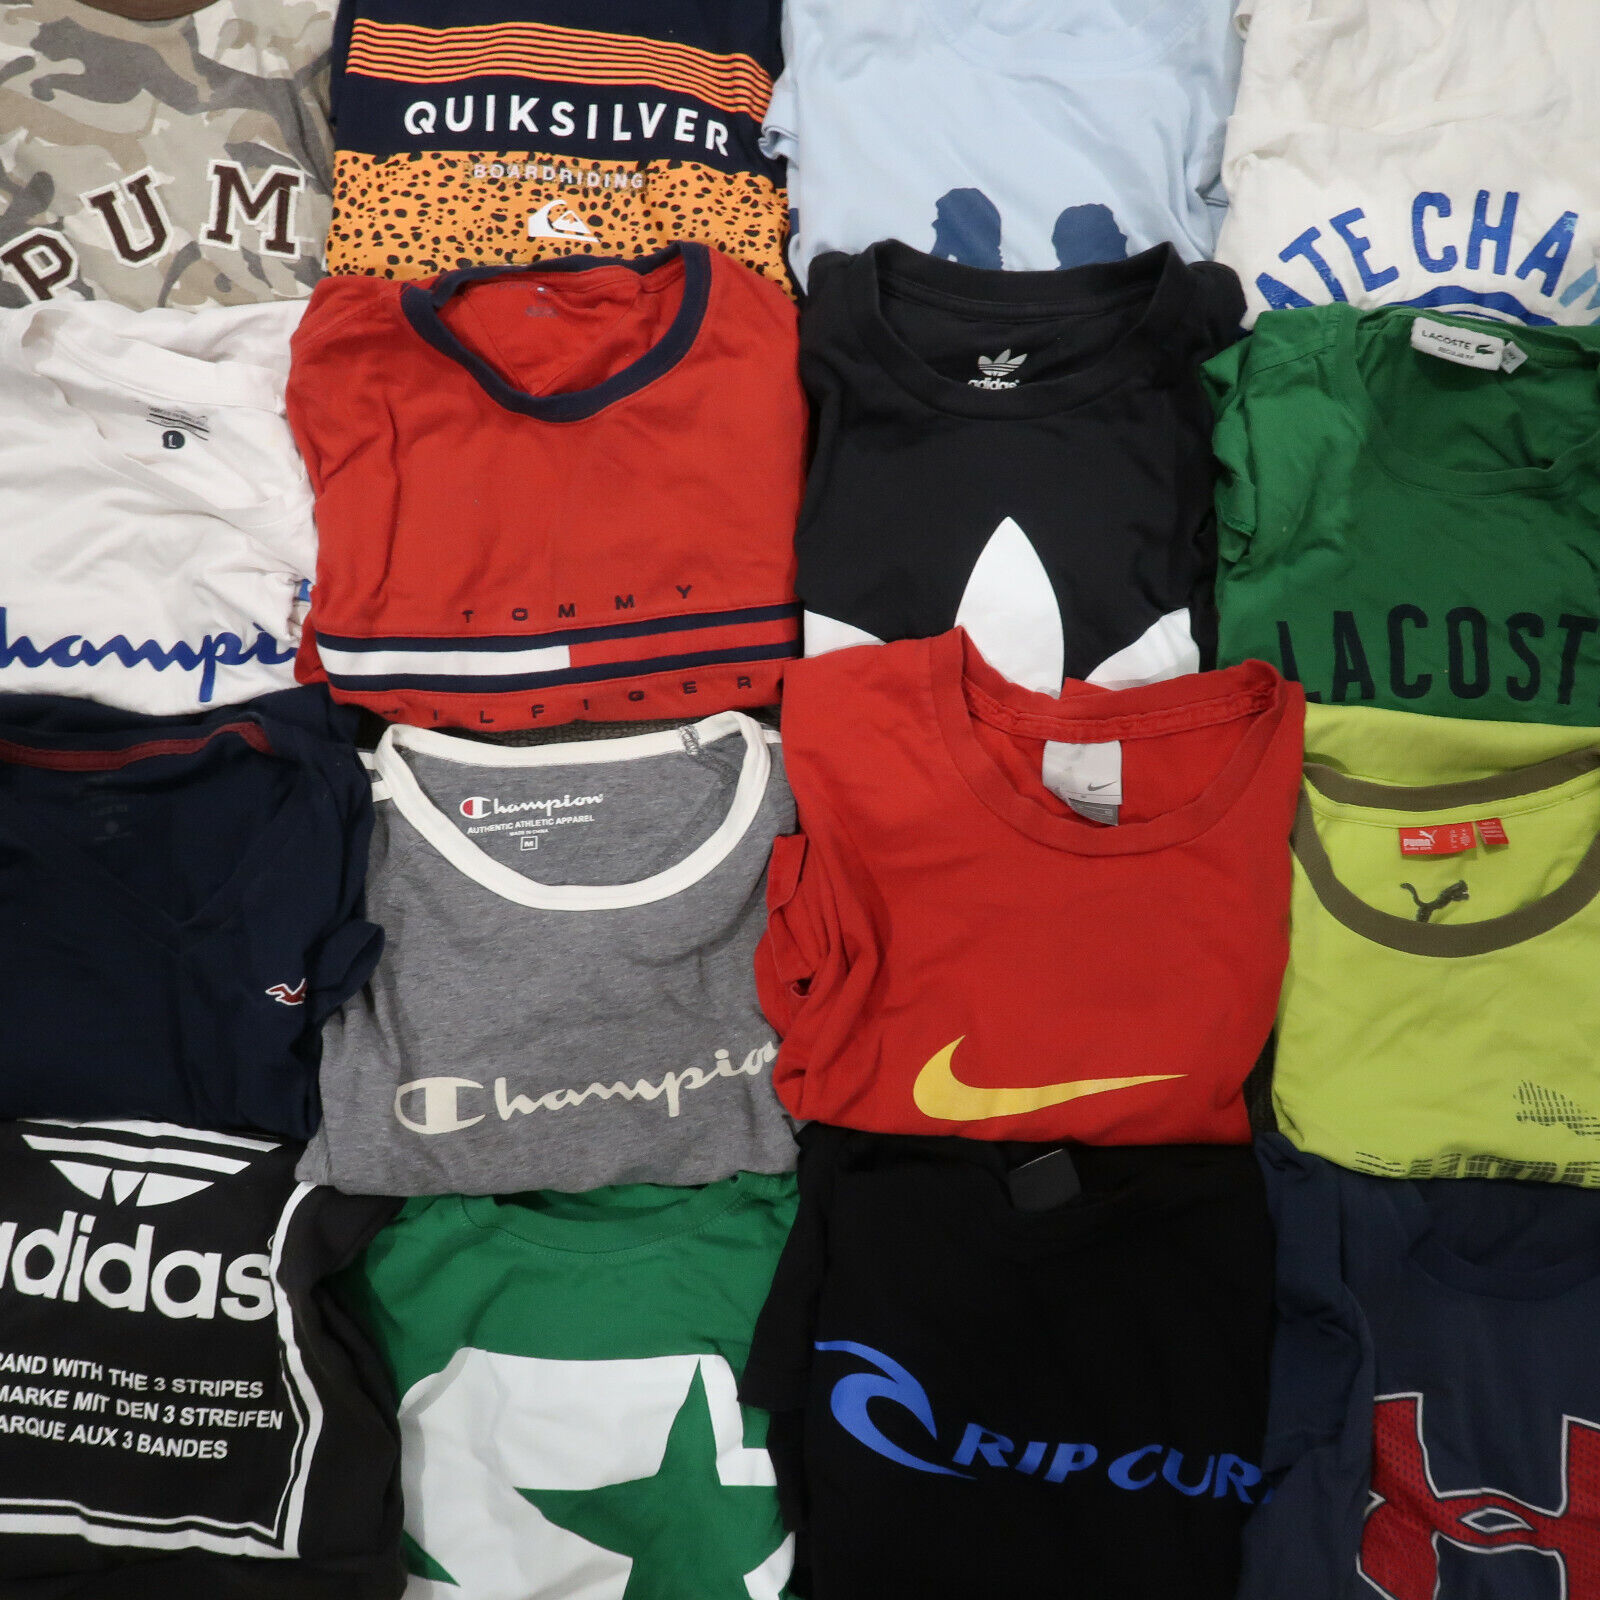 10x Mens T-Shirt Branded Nike Adidas Clothing Reseller Wholesale Bulk Lot Bundle Assorted Does Not Apply